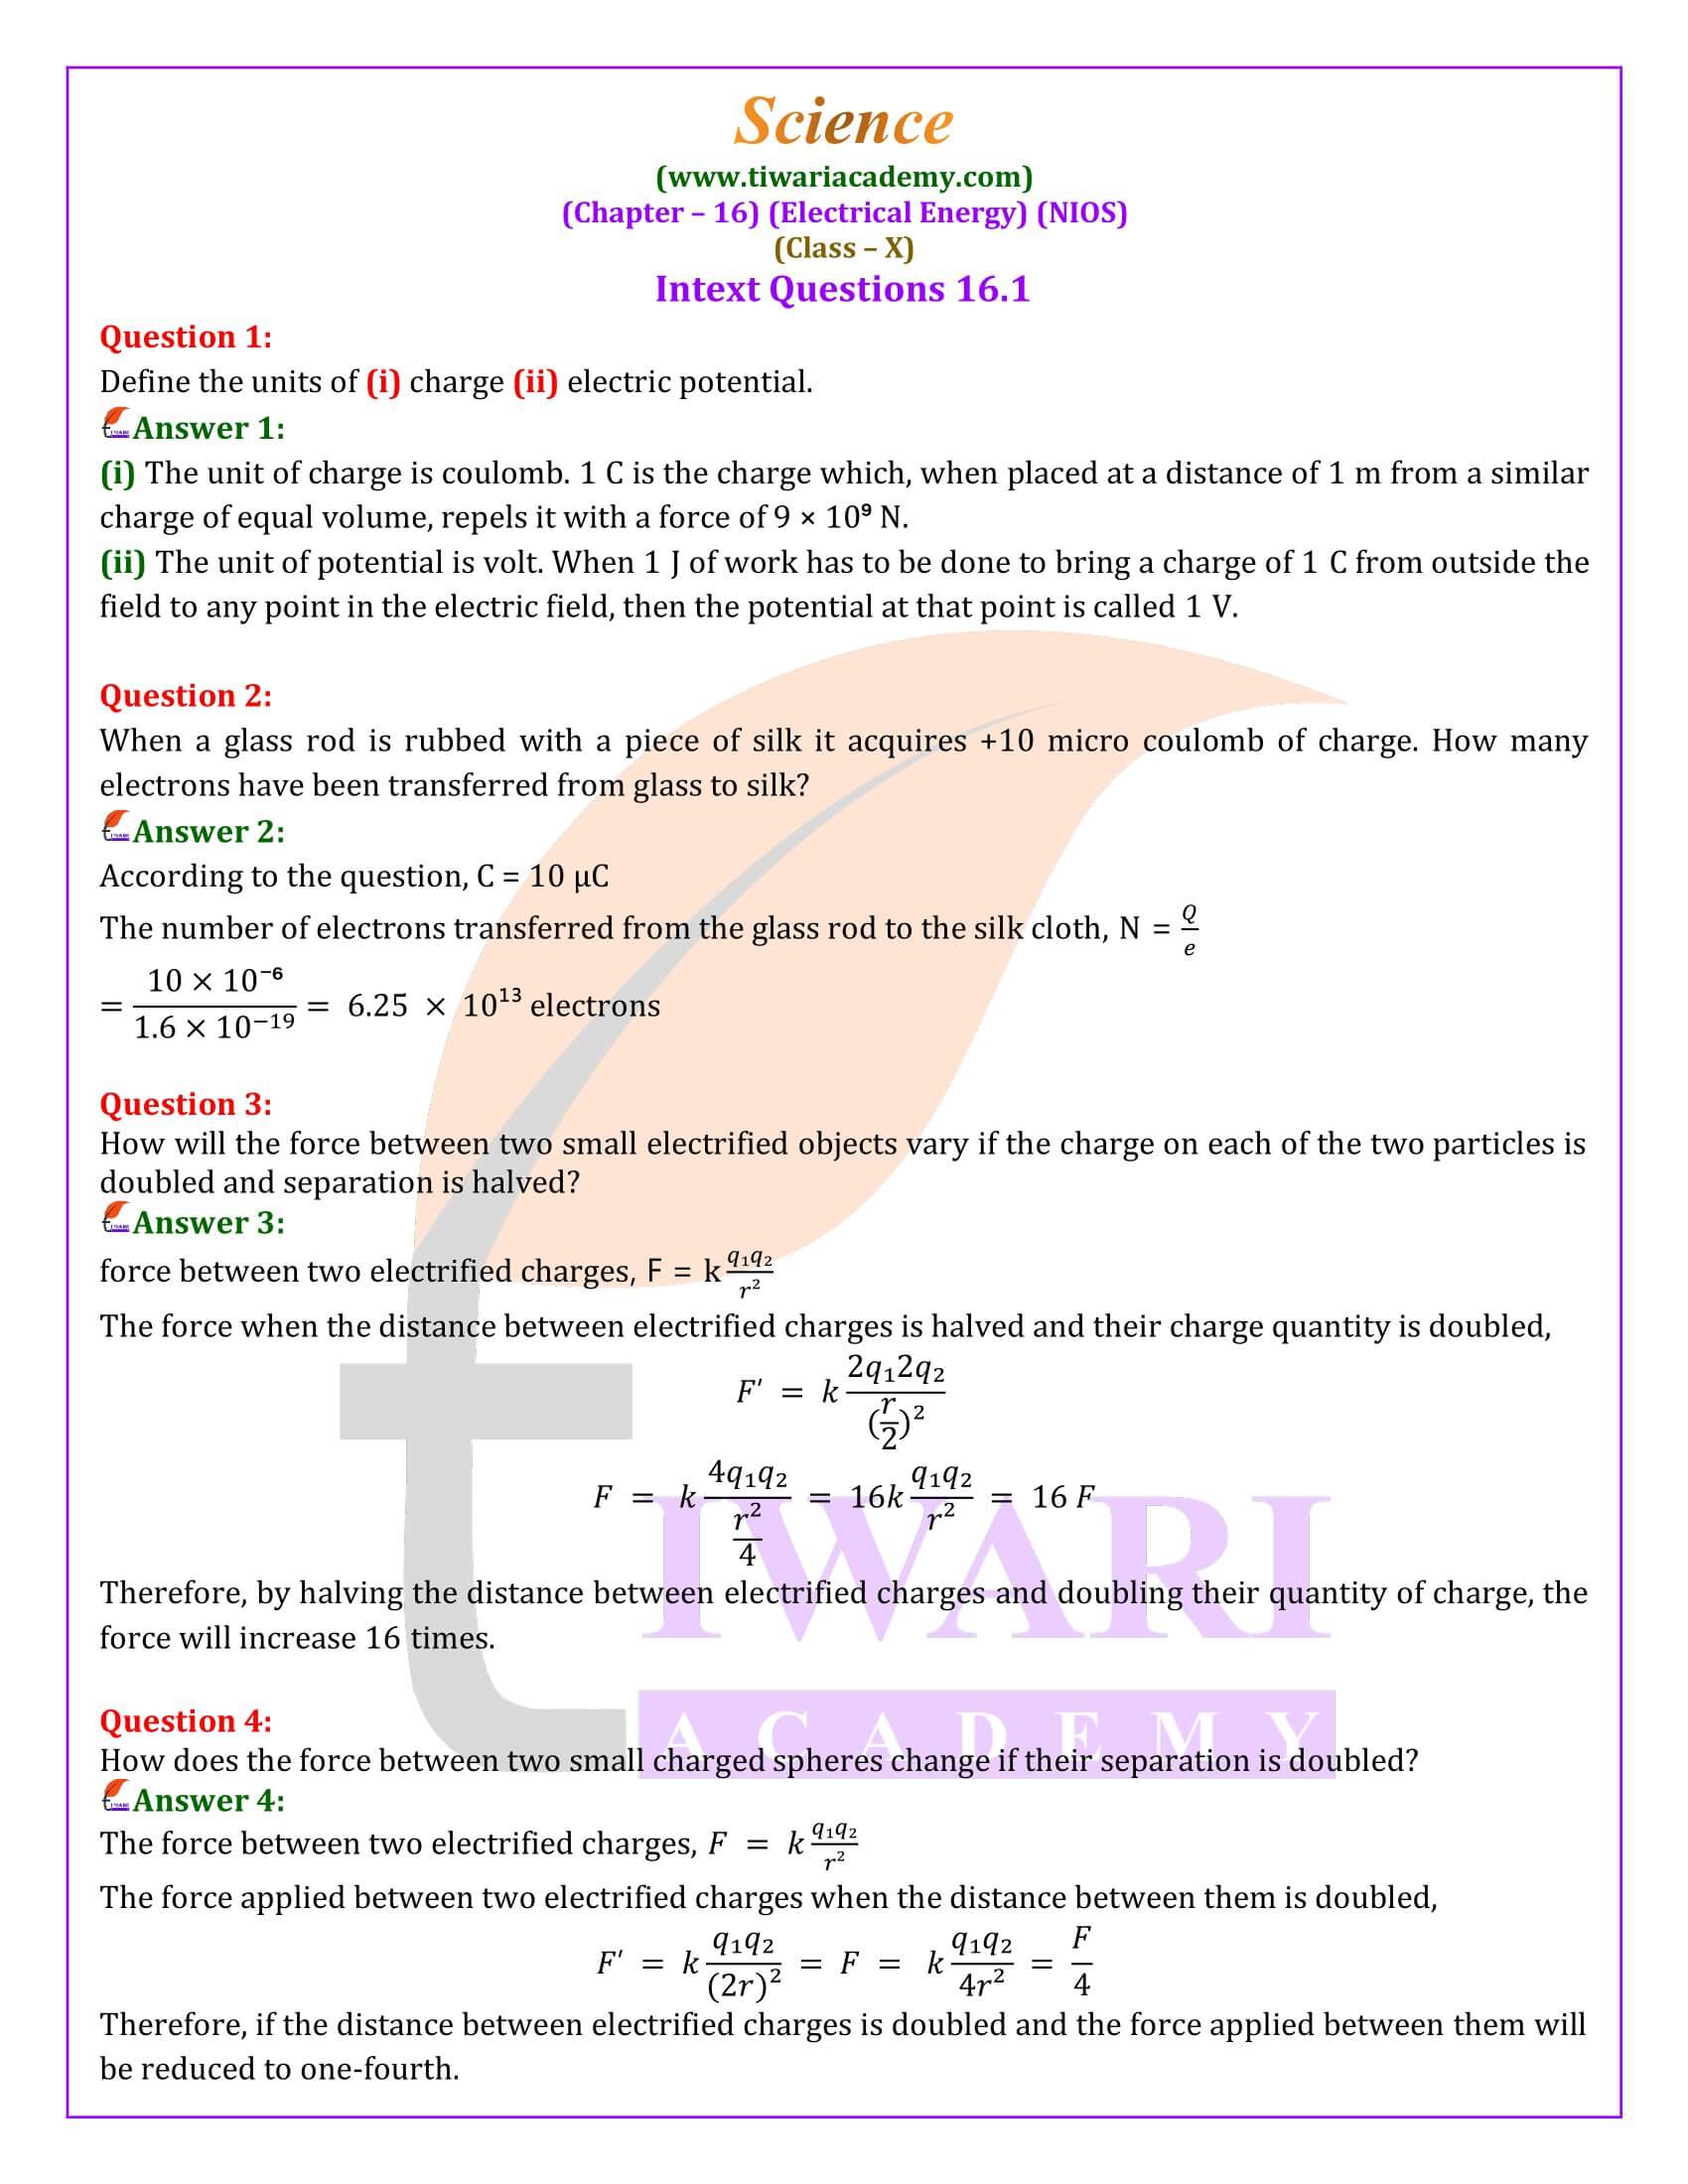 NIOS Class 10 Science Chapter 16 Electrical Energy Question Answers